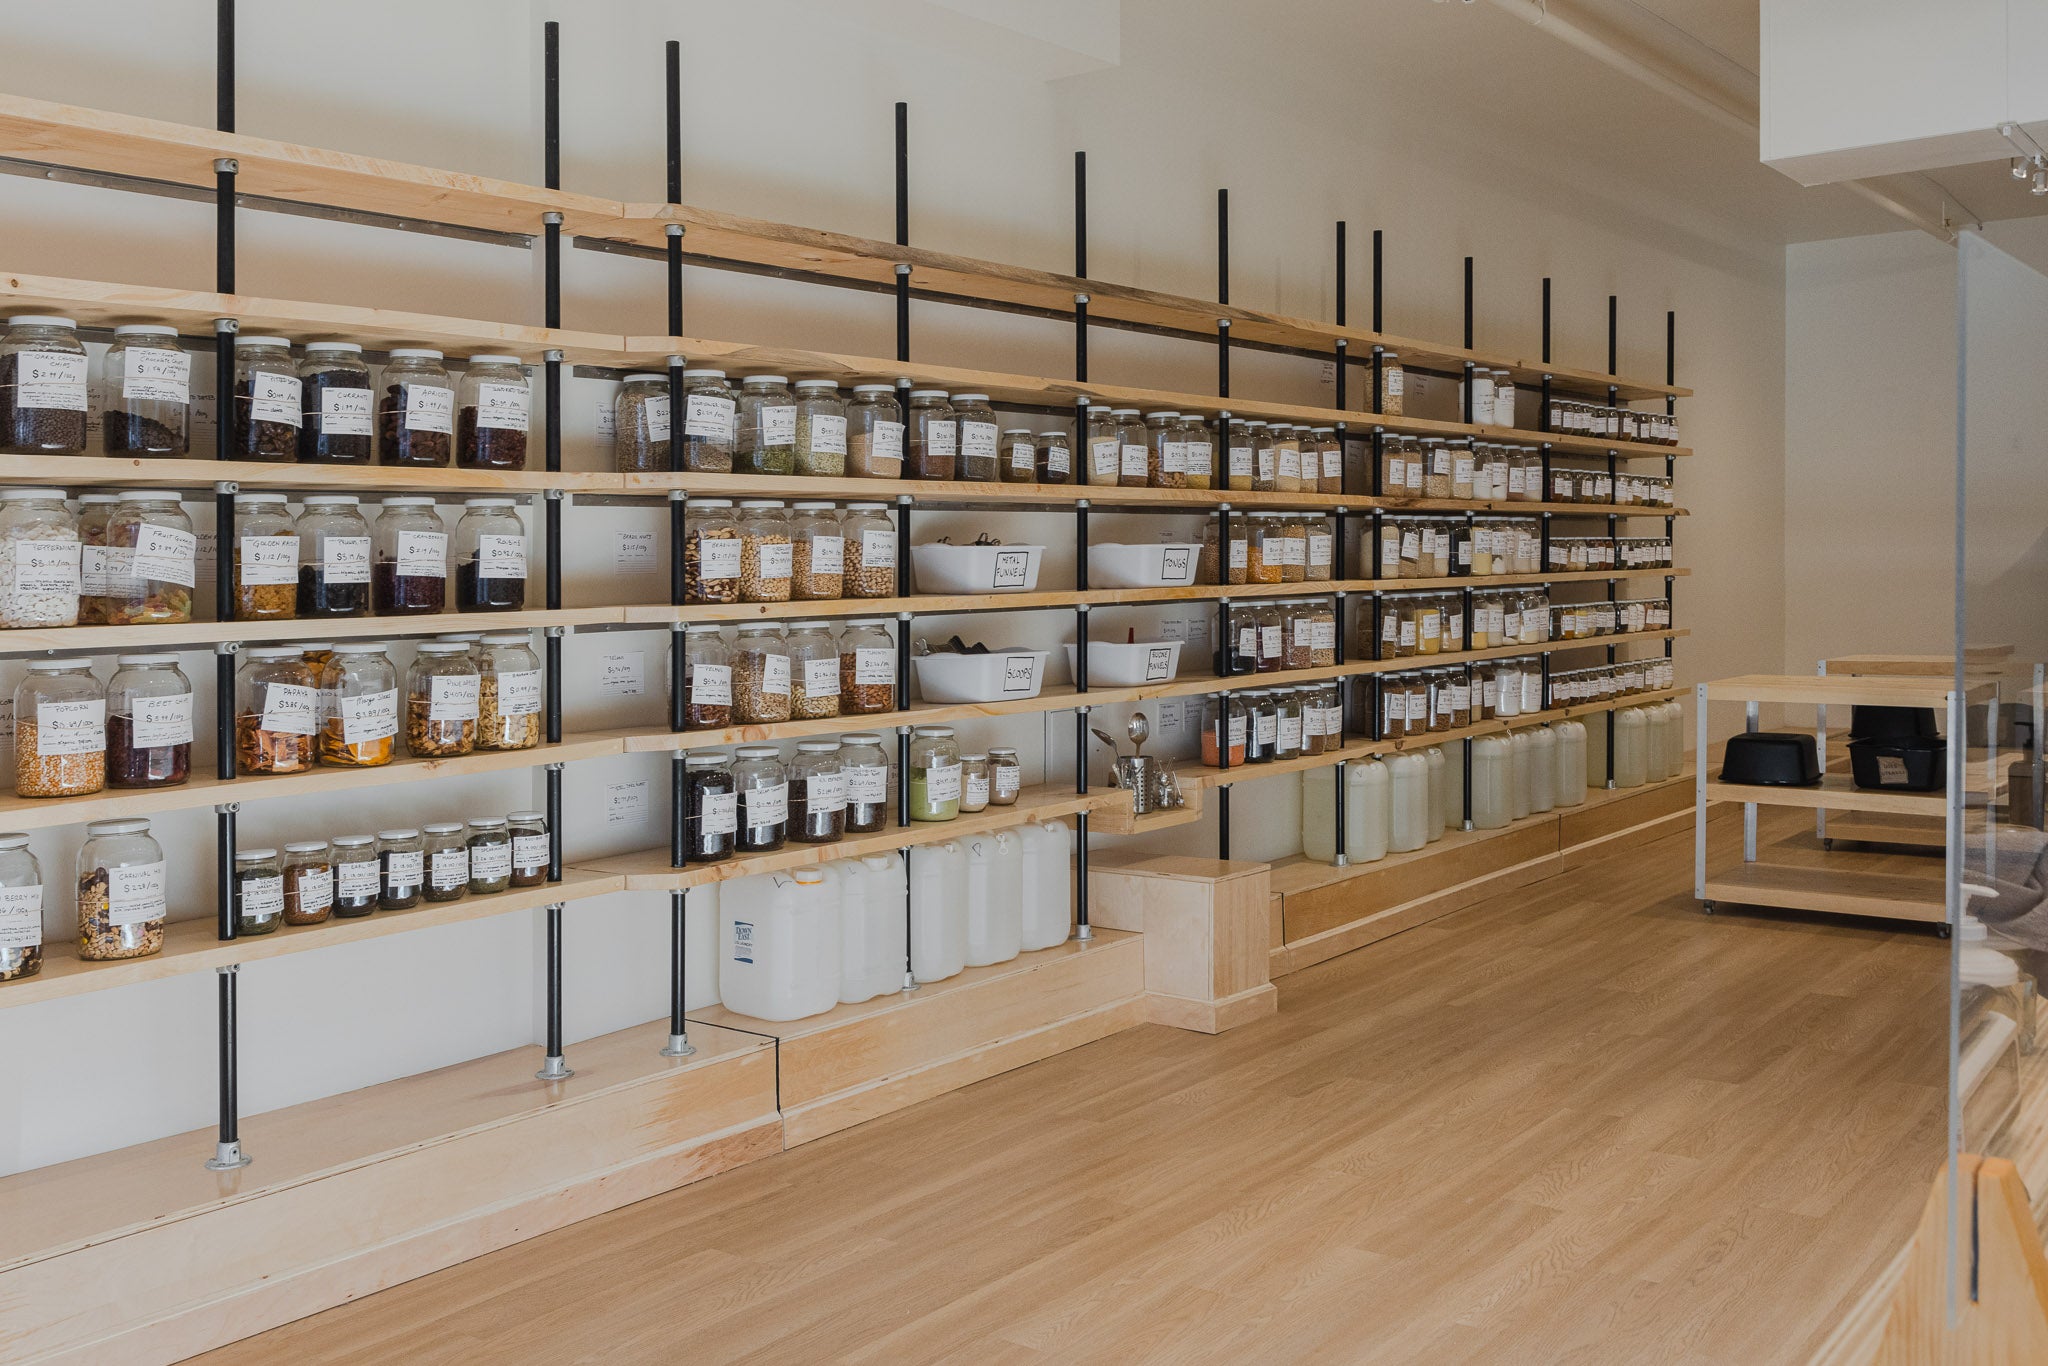 Shelves of bulk groceries in jars and containers